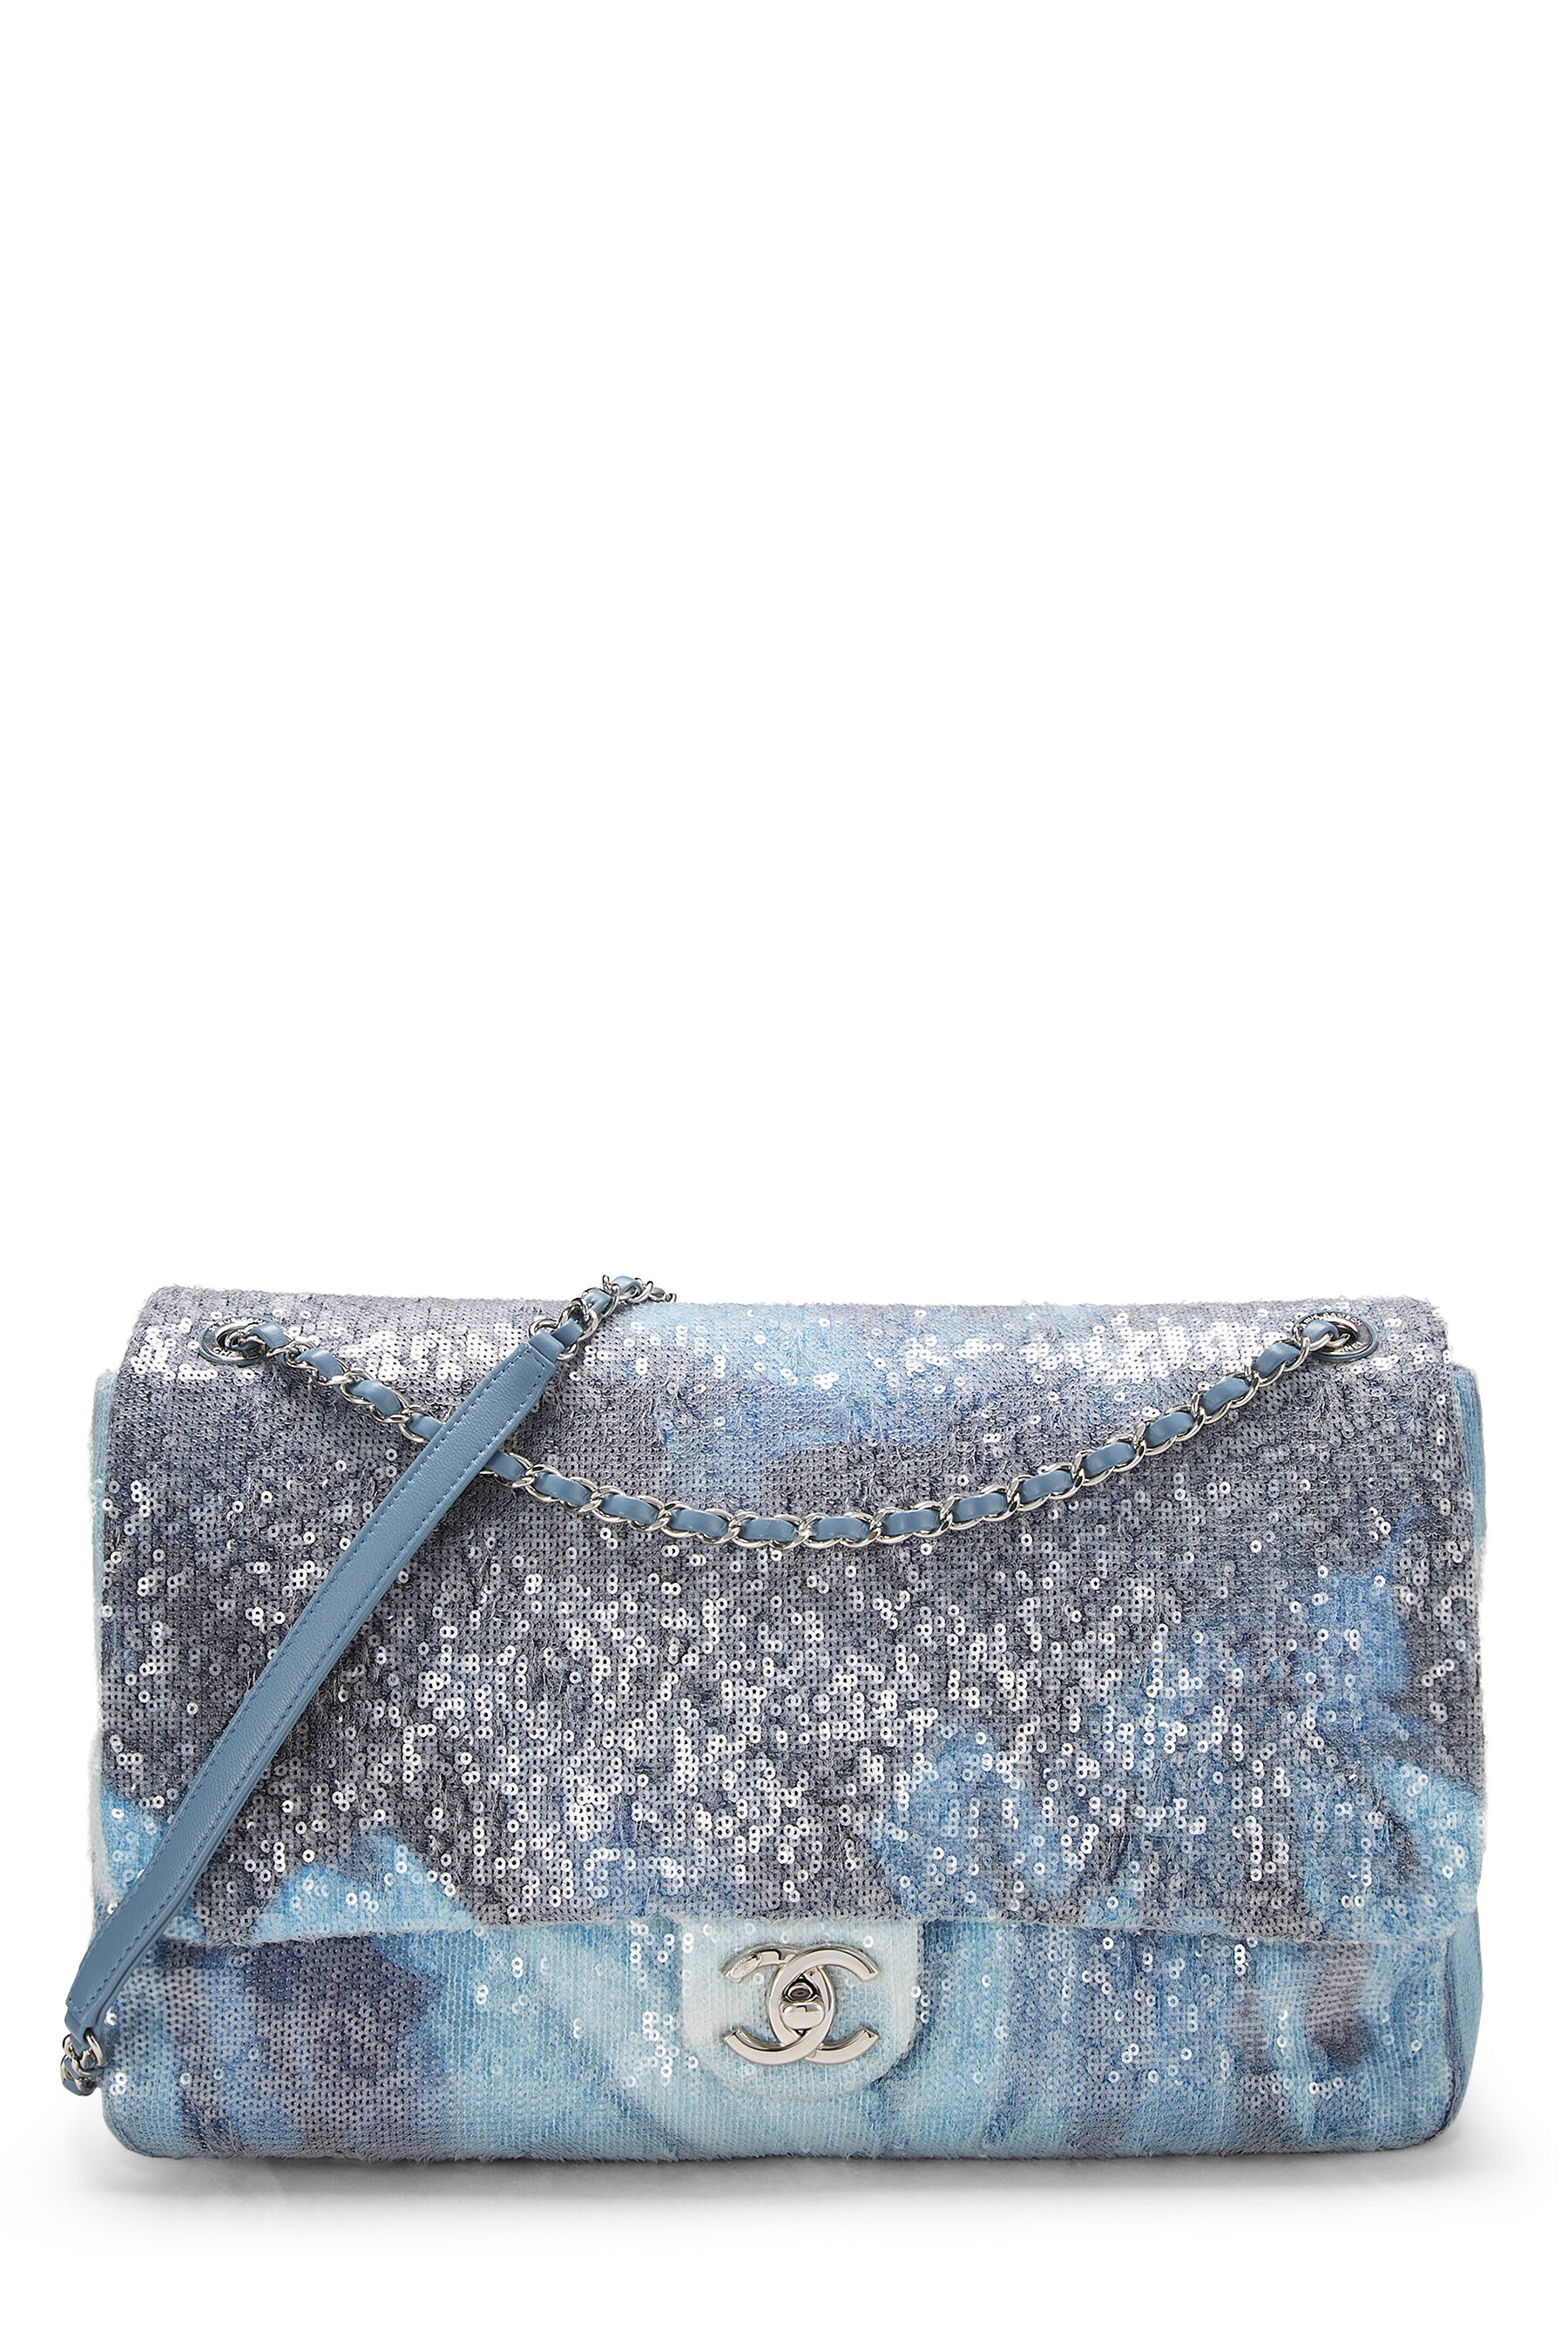 Chanel Large Sequin Waterfall Flap Bag Blue Silver Hardware – Coco Approved  Studio